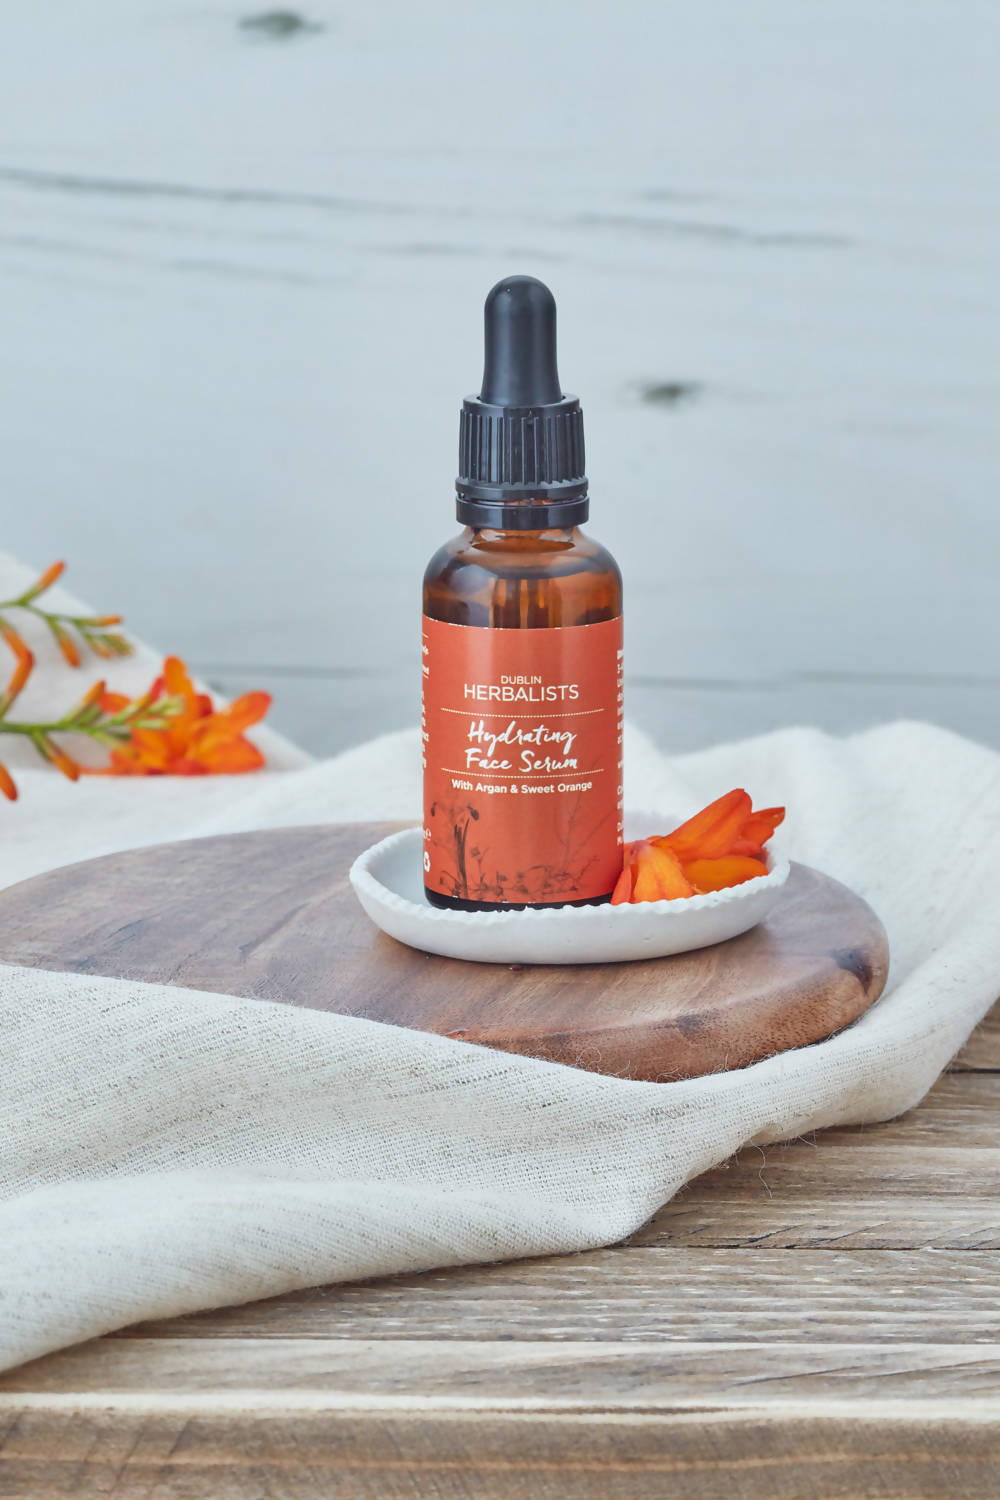 Hydrating Face Serum- With Argan Oil and Sweet Orange